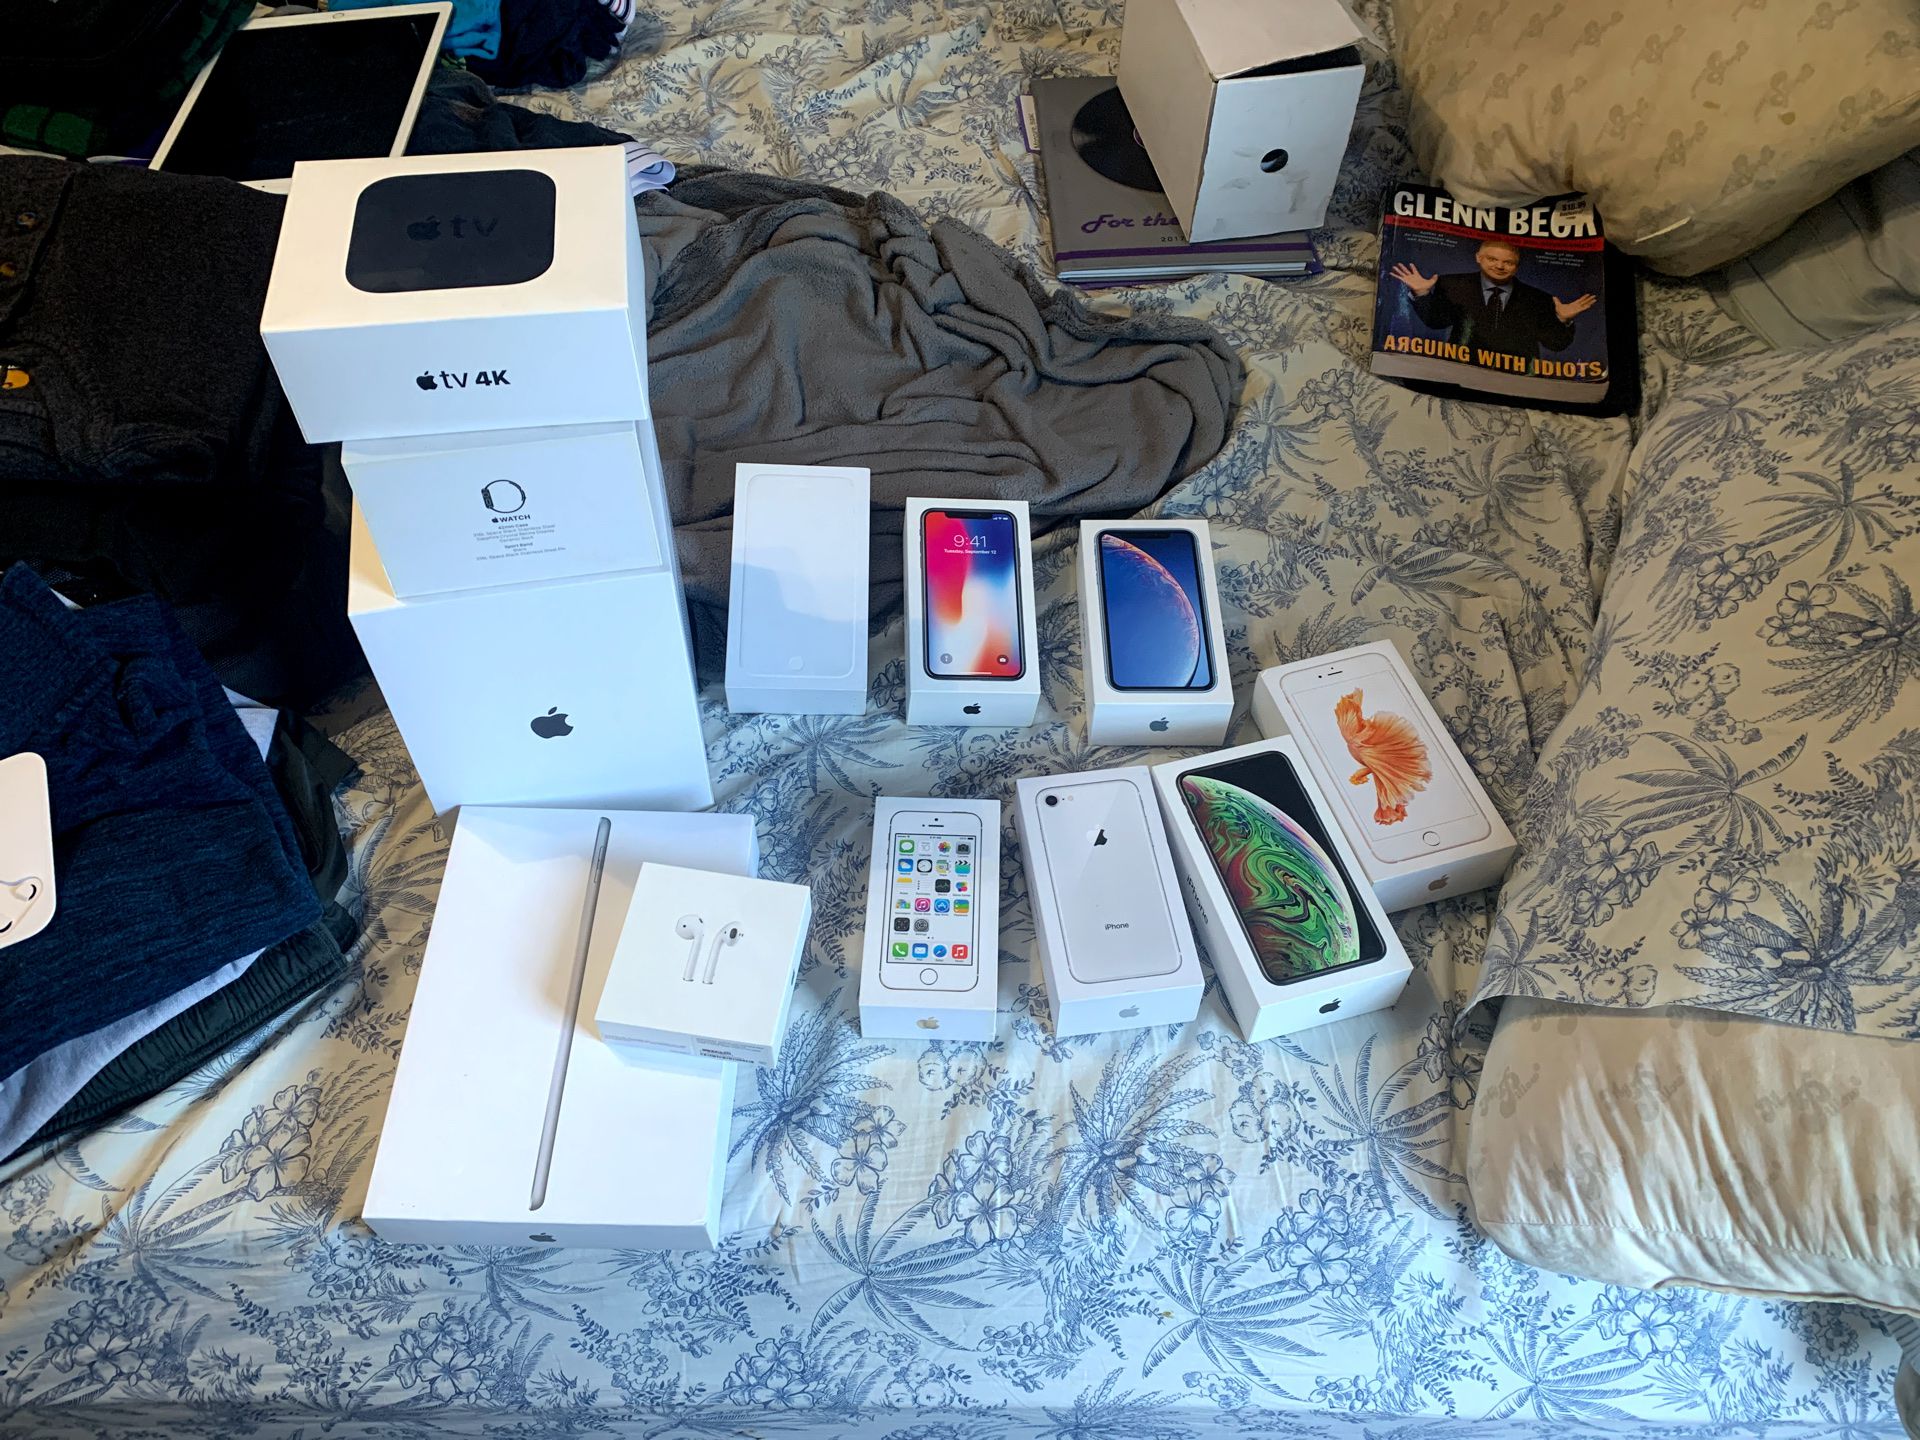 Apple Boxes ranging from iPhone 5s-iPad 6th Gen - Apple Watch Series 1 and HomePod box